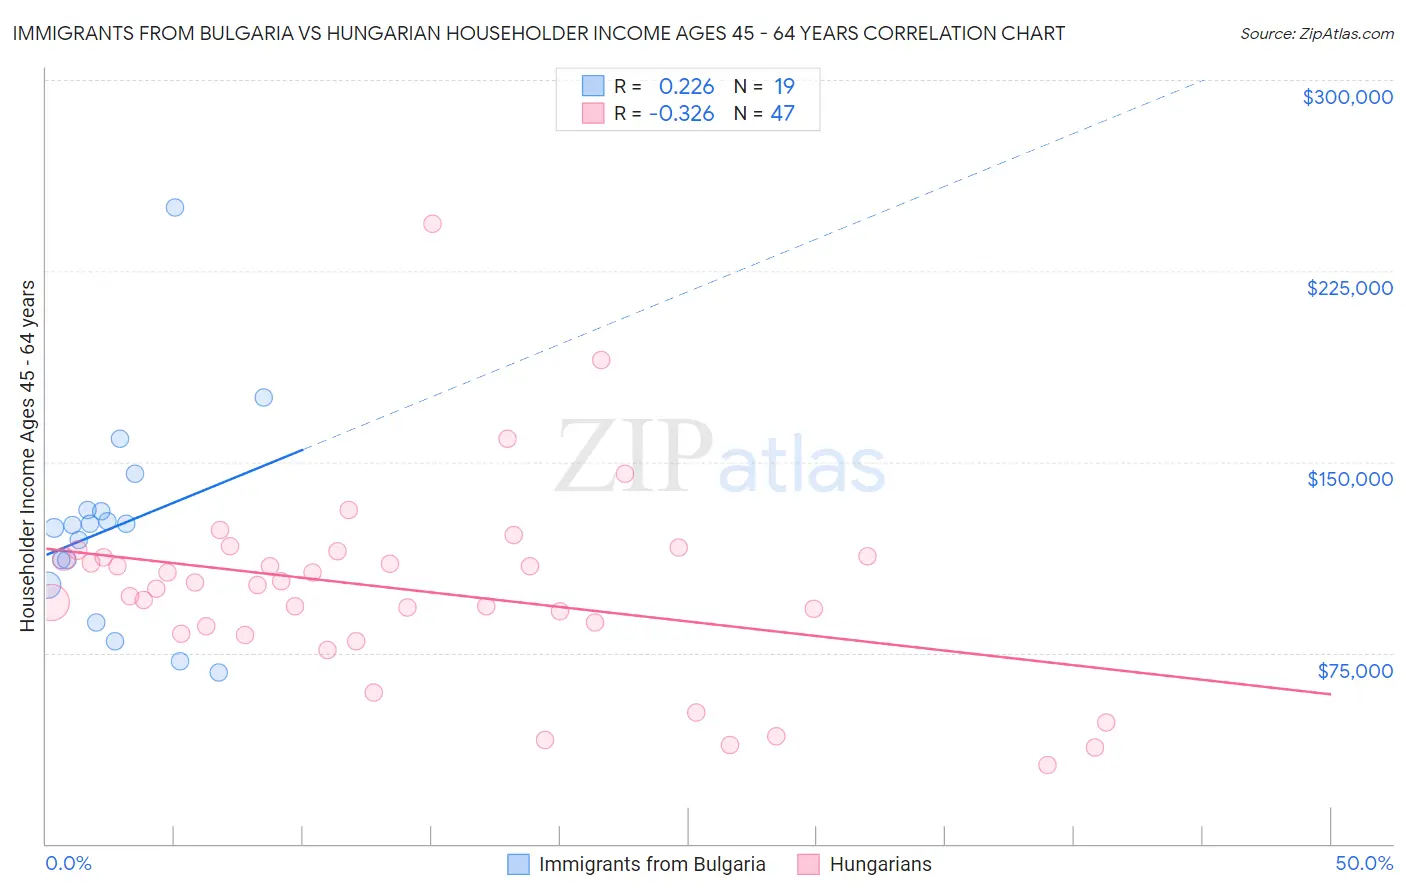 Immigrants from Bulgaria vs Hungarian Householder Income Ages 45 - 64 years